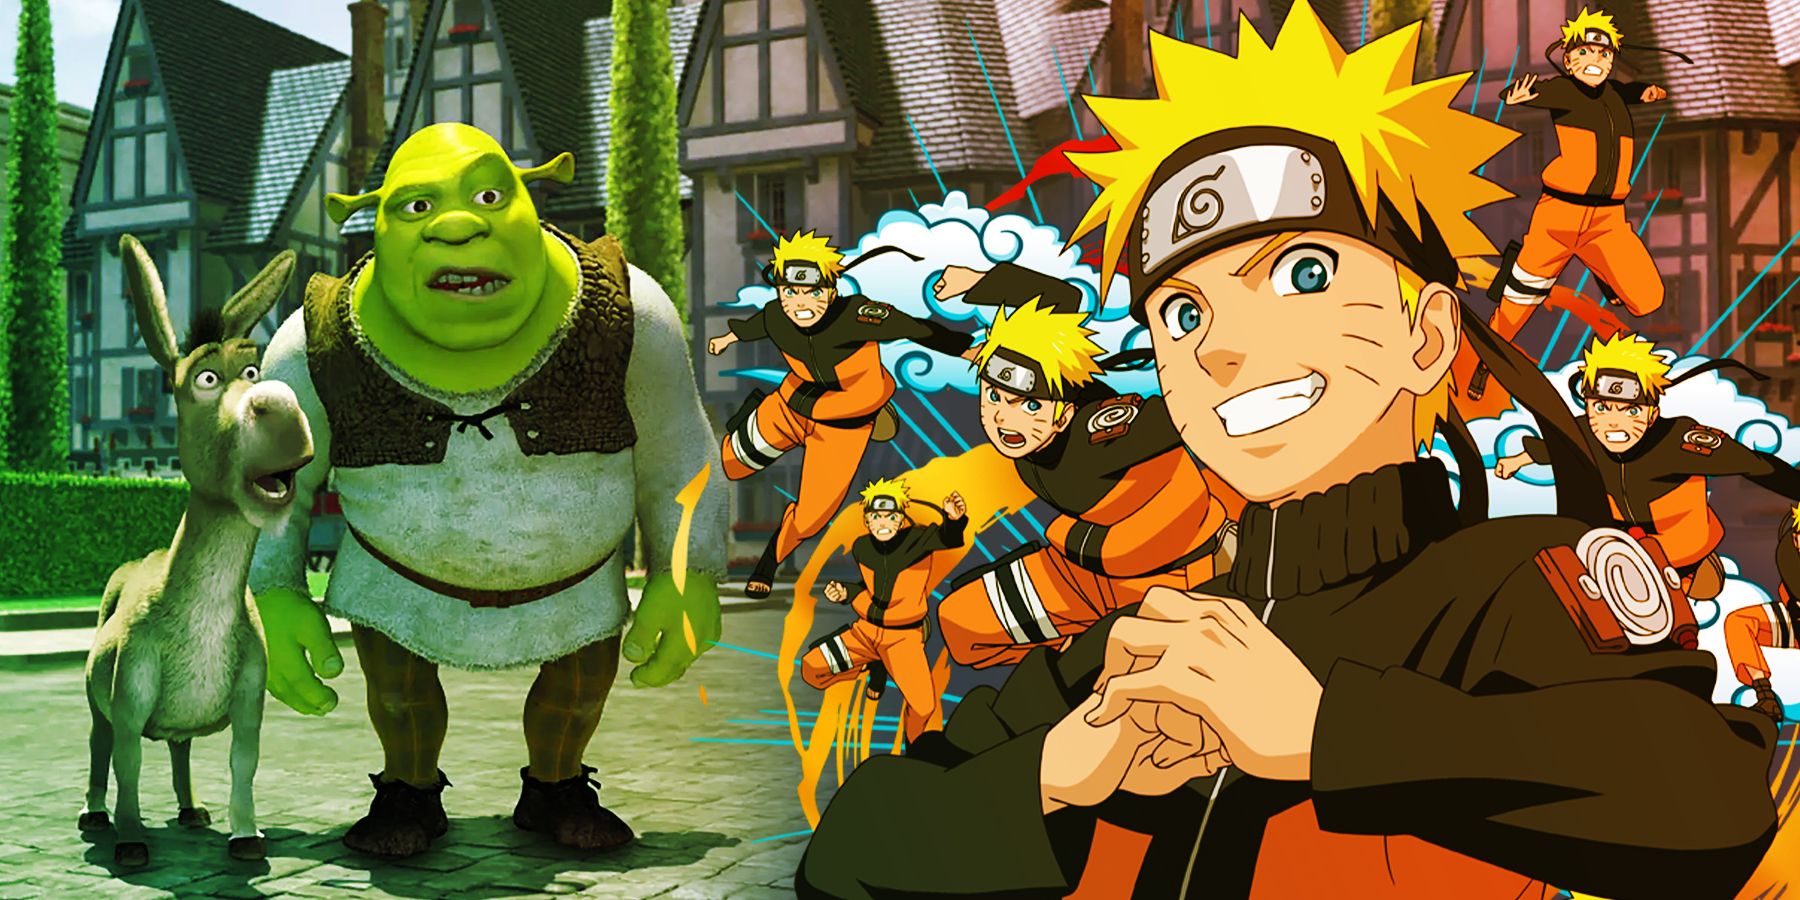 Naruto & Other Movies & TV Shows to Watch on Hulu/Prime Video This Weekend